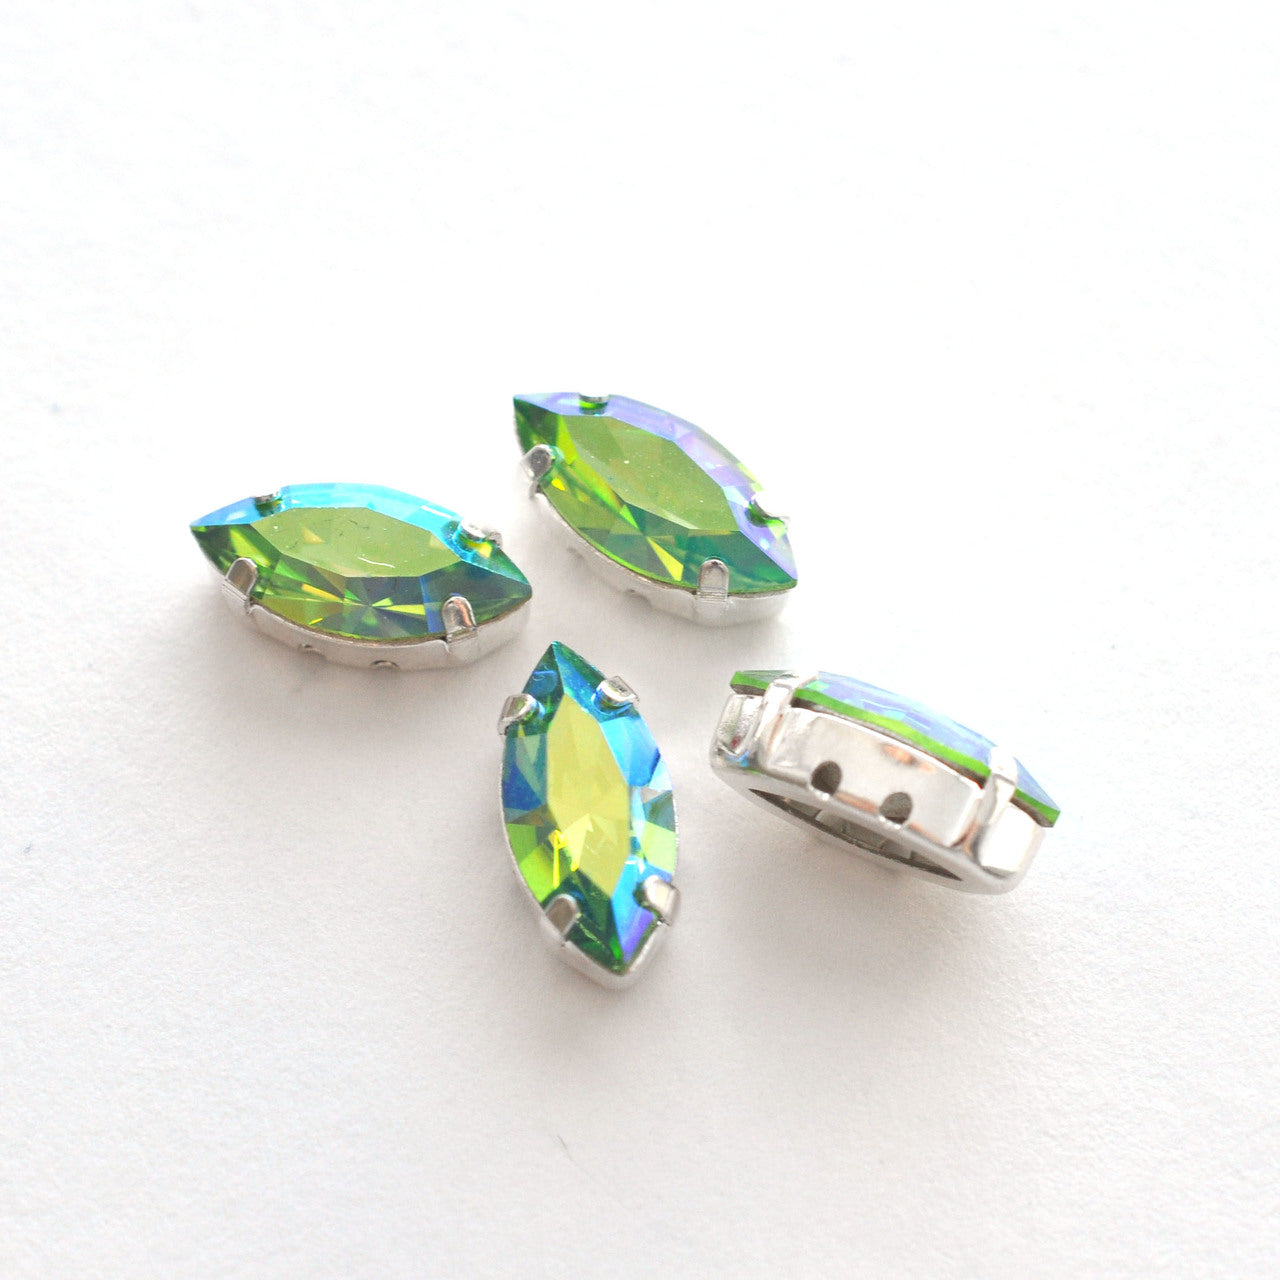 Peridot AB 15x7mm Navette Sew On Crystals - 4 Pieces